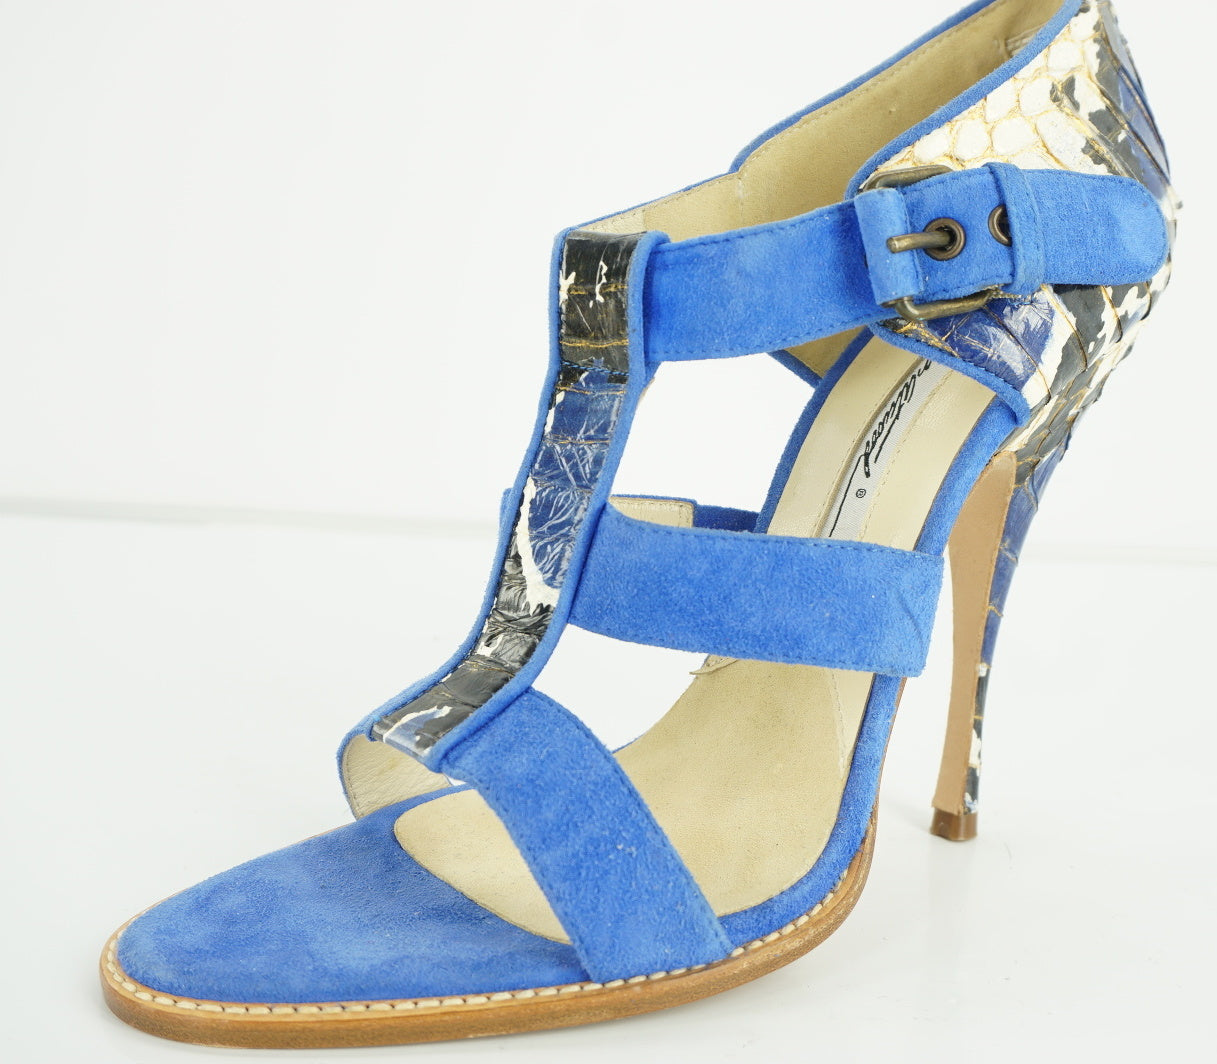 Brian Atwood Womens Audra Sandal Blue Snakeskin Size 7.5